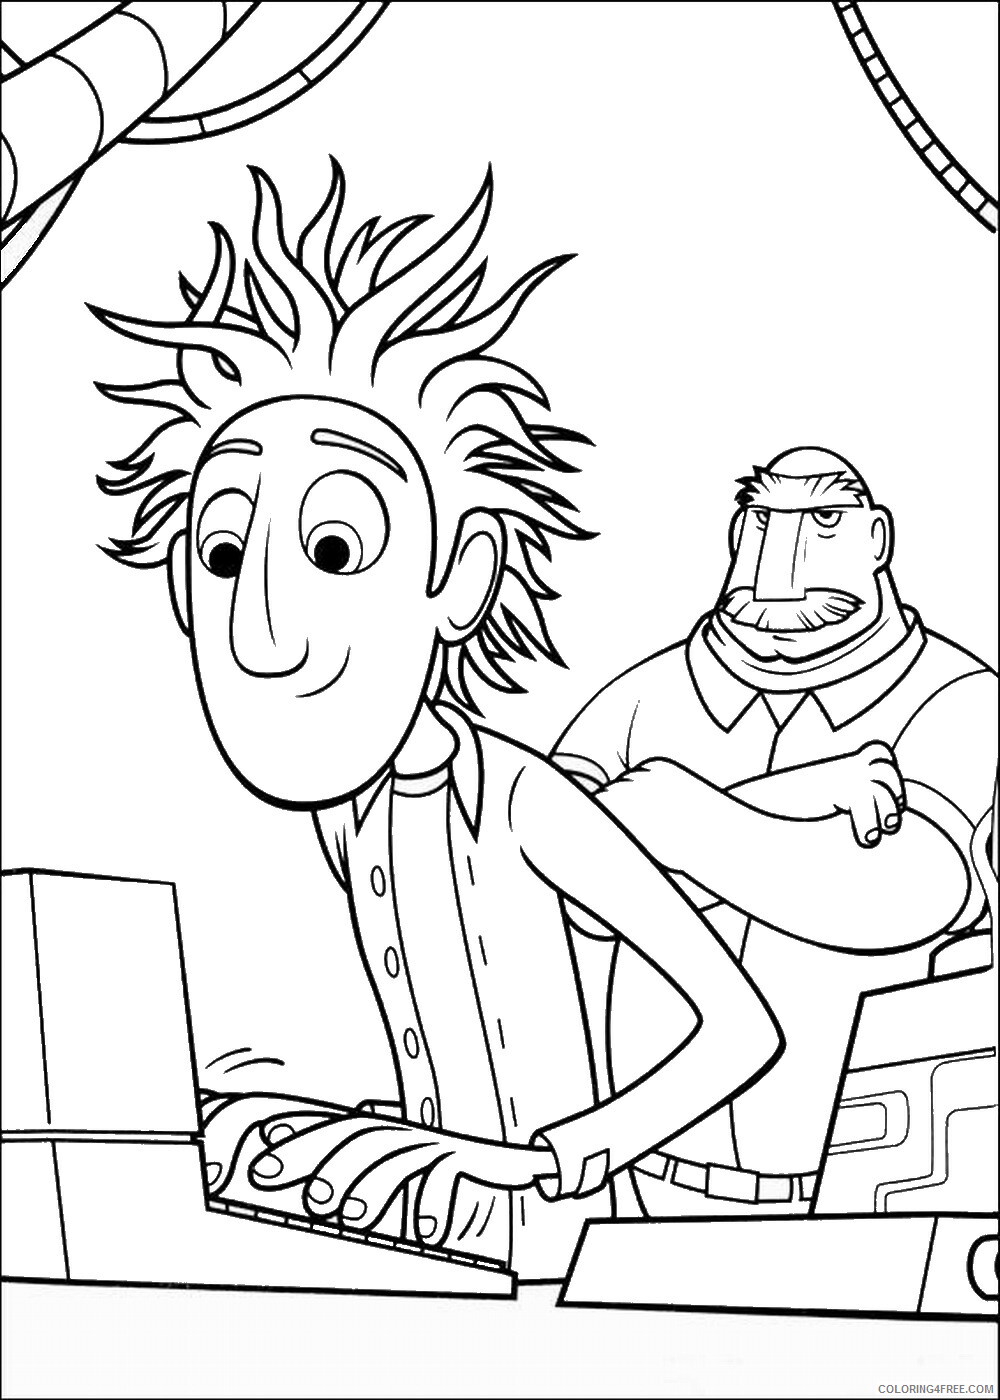 Cloudy with a Chance of Meatballs Coloring Pages TV Film Printable 2020 02216 Coloring4free